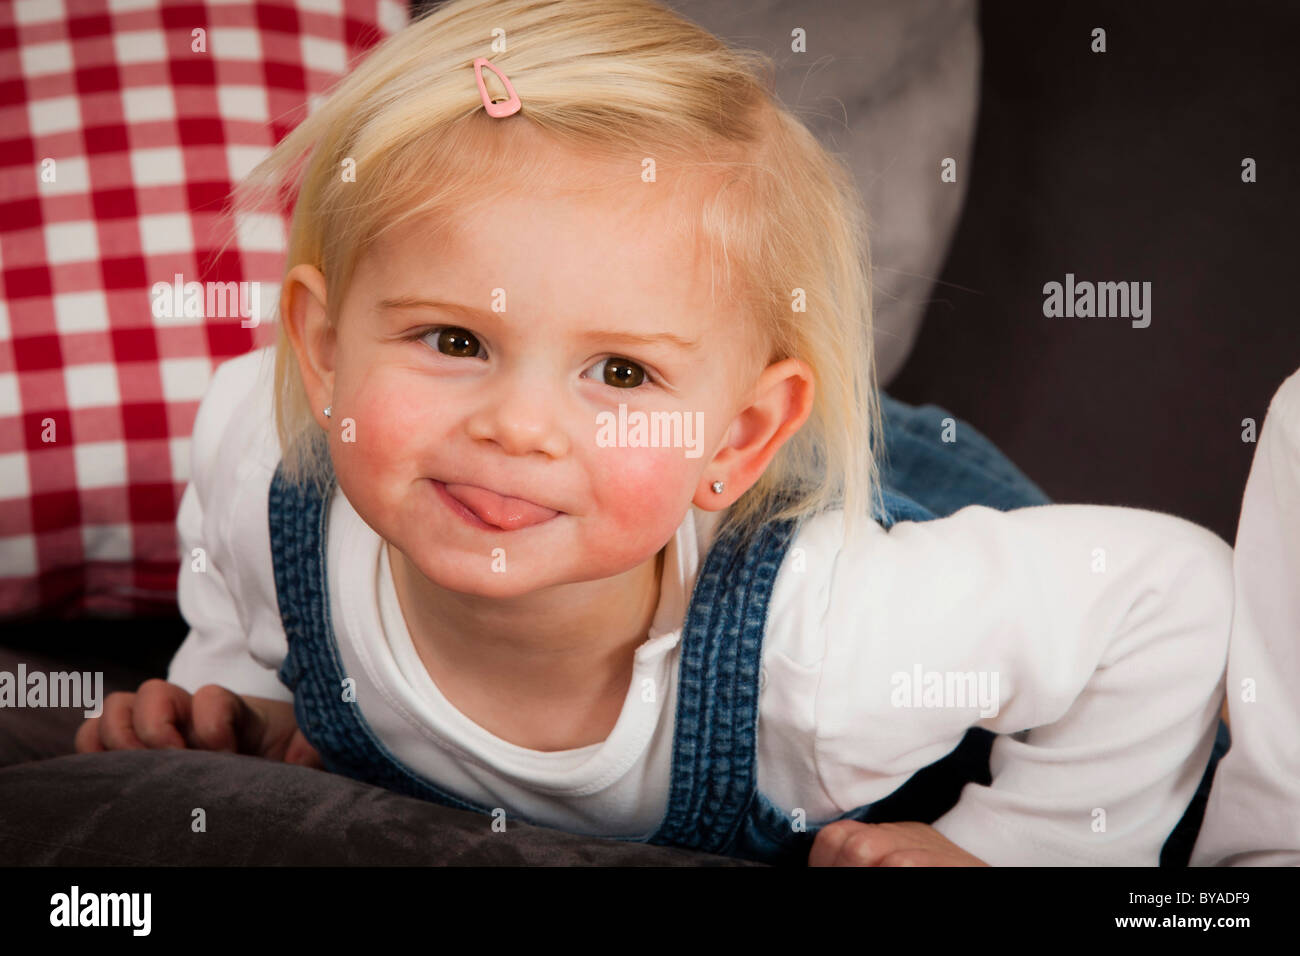 Girls, 1.5 years, cheekily sticking her tongue out Stock Photo